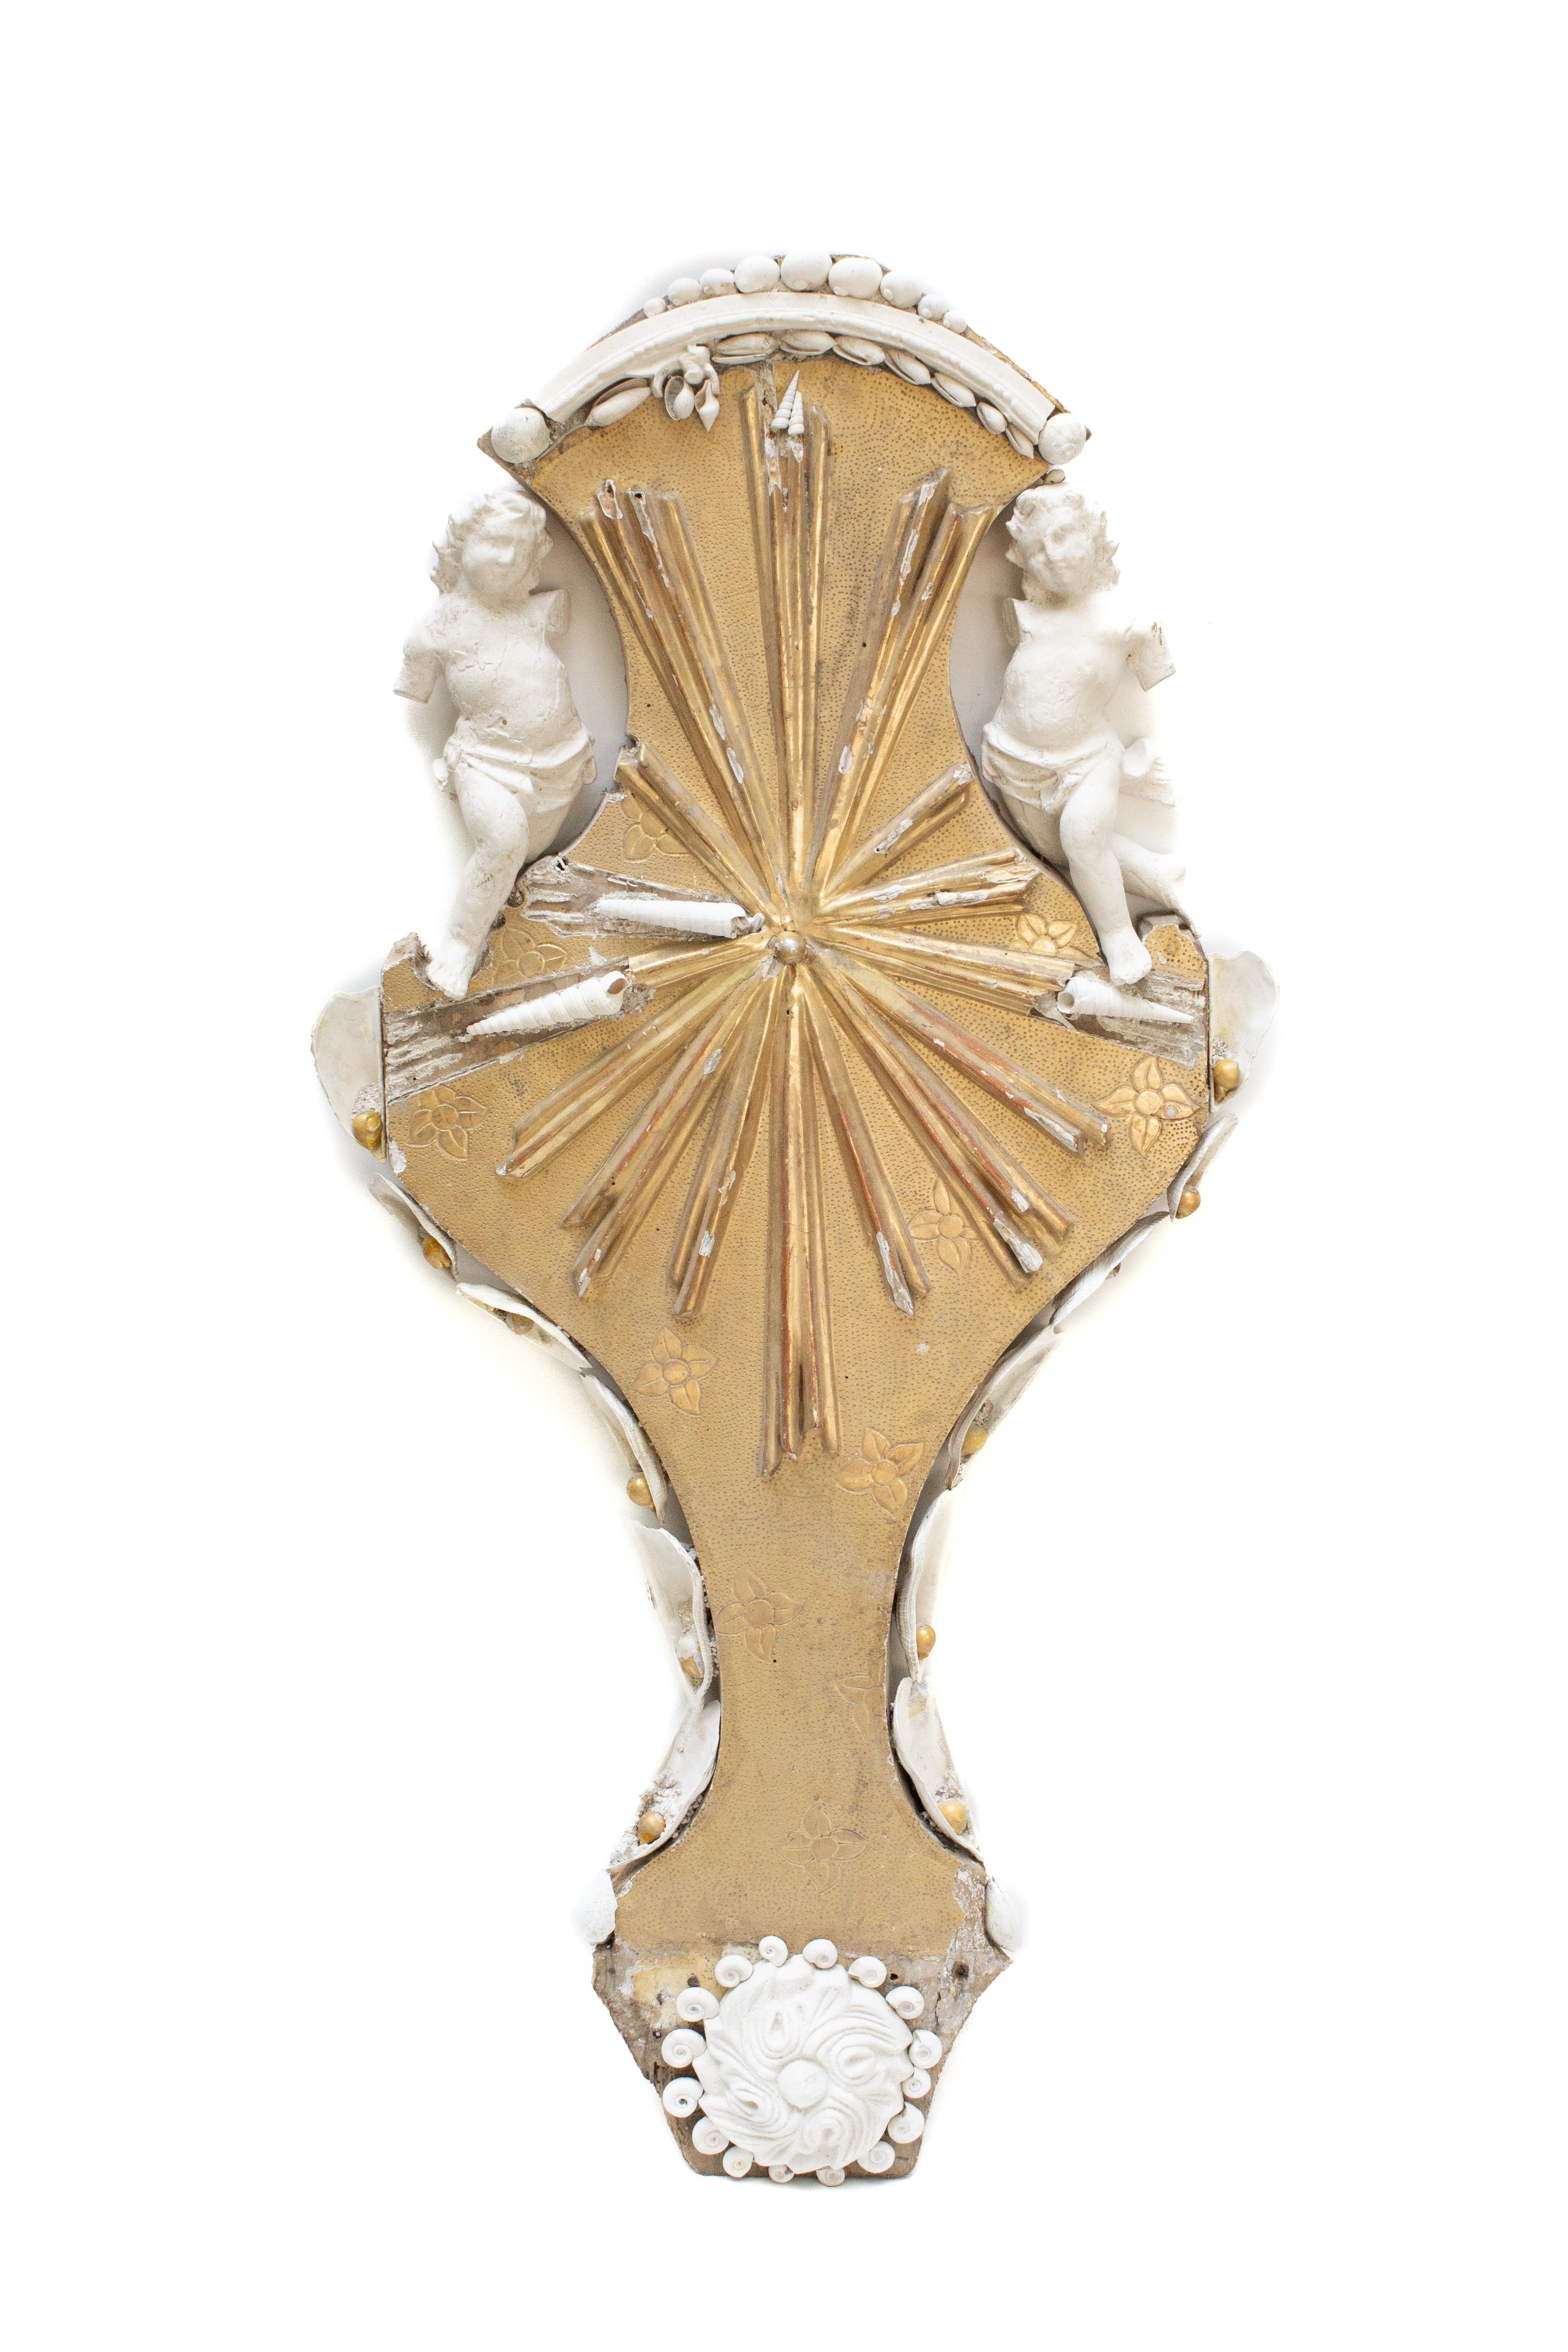 18th century Italian hand-carved gold leaf architectural element with a pair of hand-cast plaster angels, a plaster rosette, and a detail plaster cornice molding. It is adorned with coordinating white fossil shells and gold baroque pearls. The